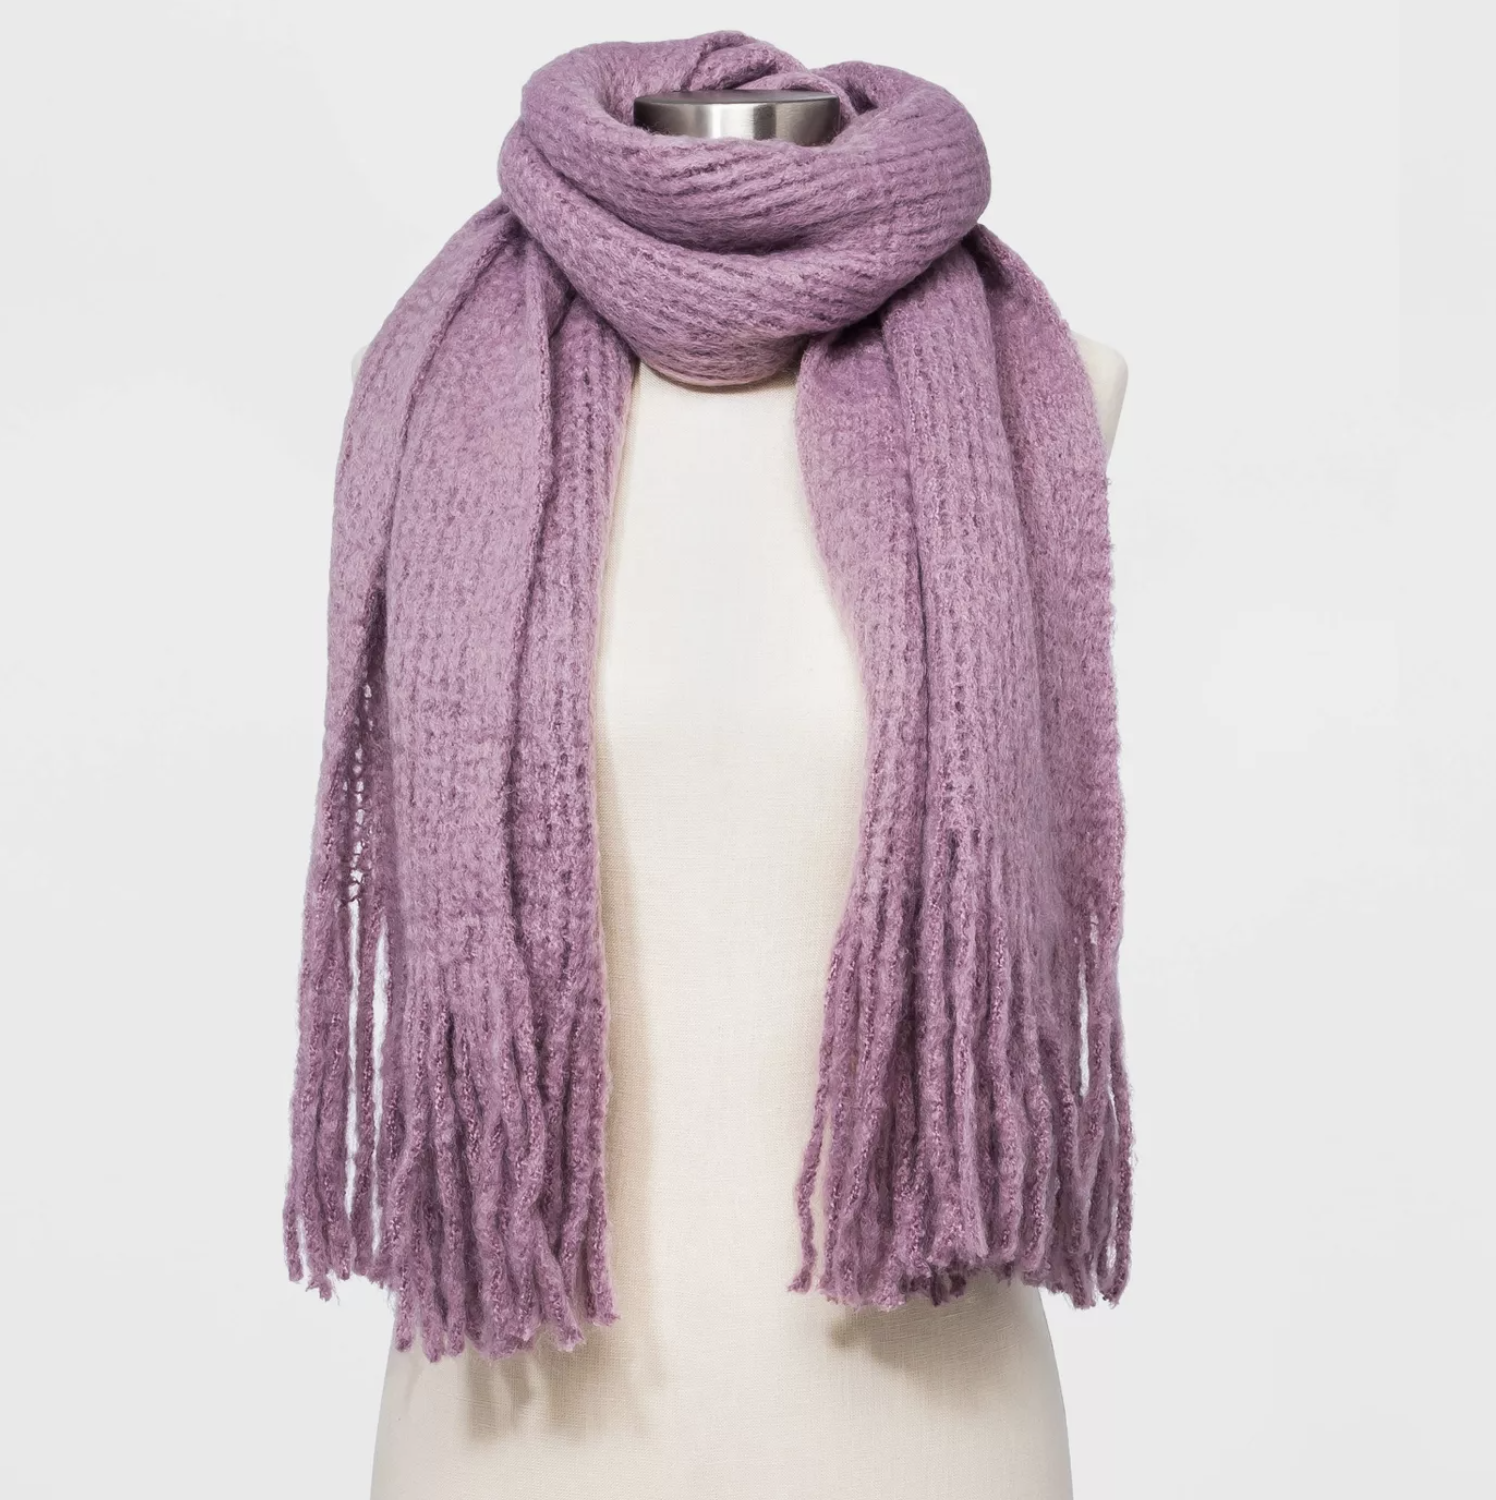 Mannequin wearing the purple scarf